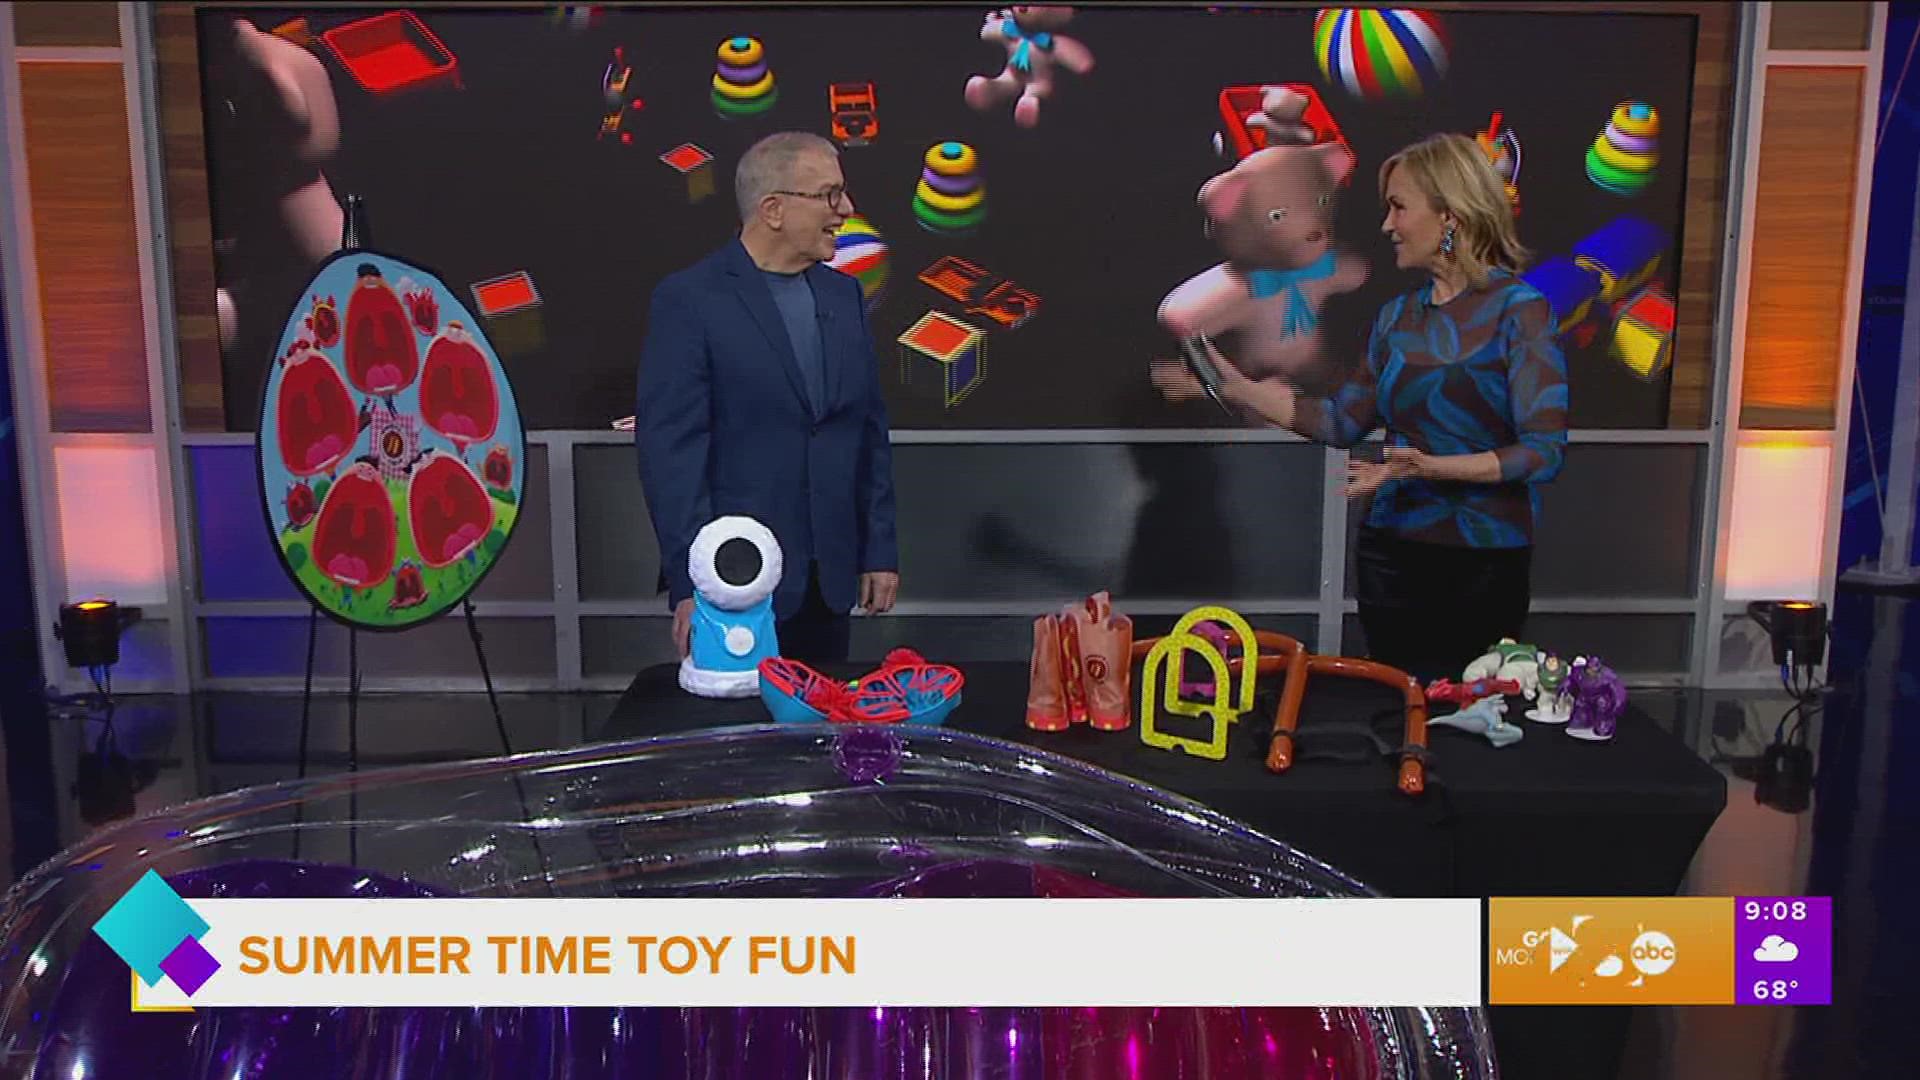 "The Toy Guy" Chris Byrne shares his top summer toy picks